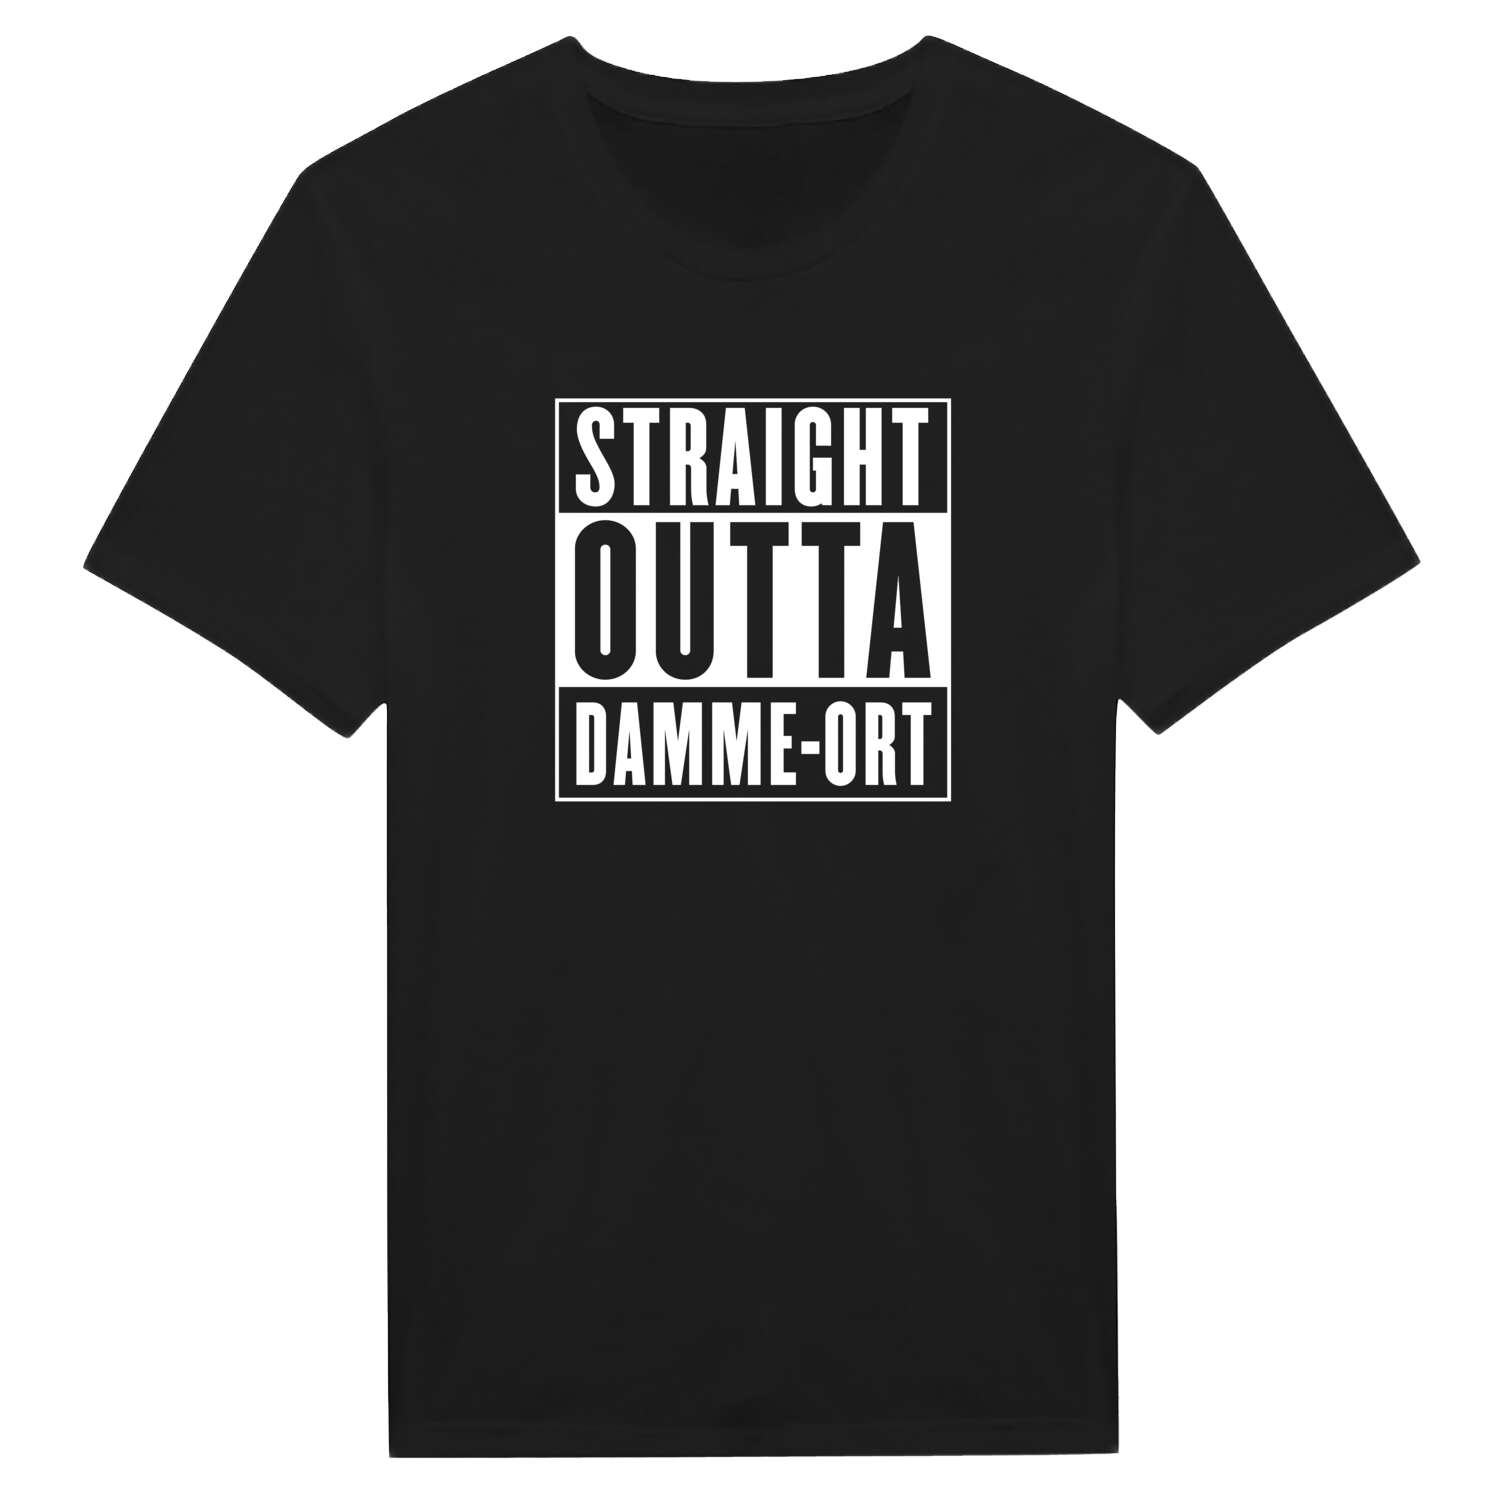 Damme-Ort T-Shirt »Straight Outta«